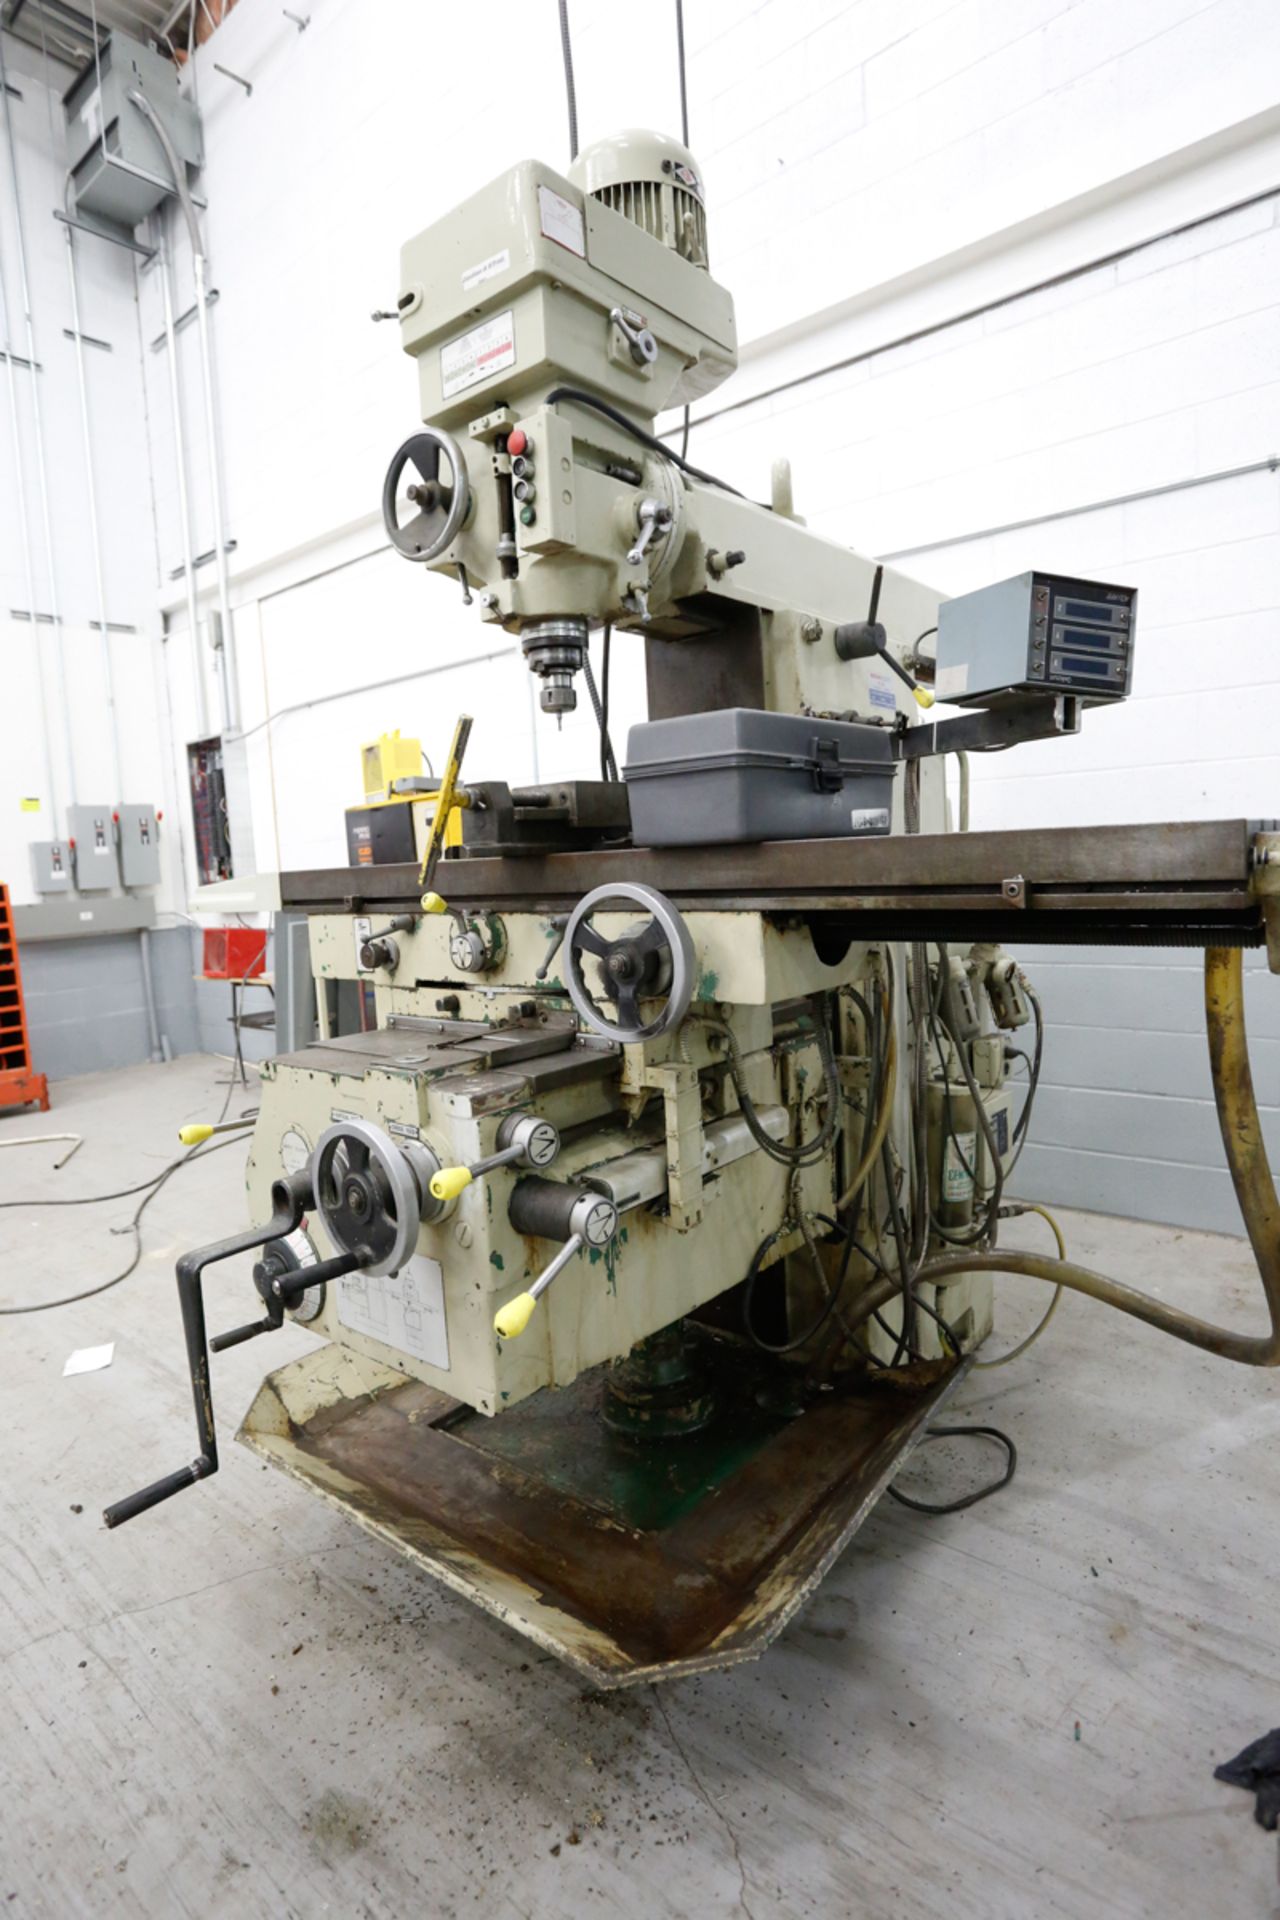 H.D. TURRET MILL, 12" X 54" TABLE, ACU-RITE DRO, 40 TAPER SPINDLE, 60-2250 RPM, VISE & COLLET CHUCK - Image 6 of 12